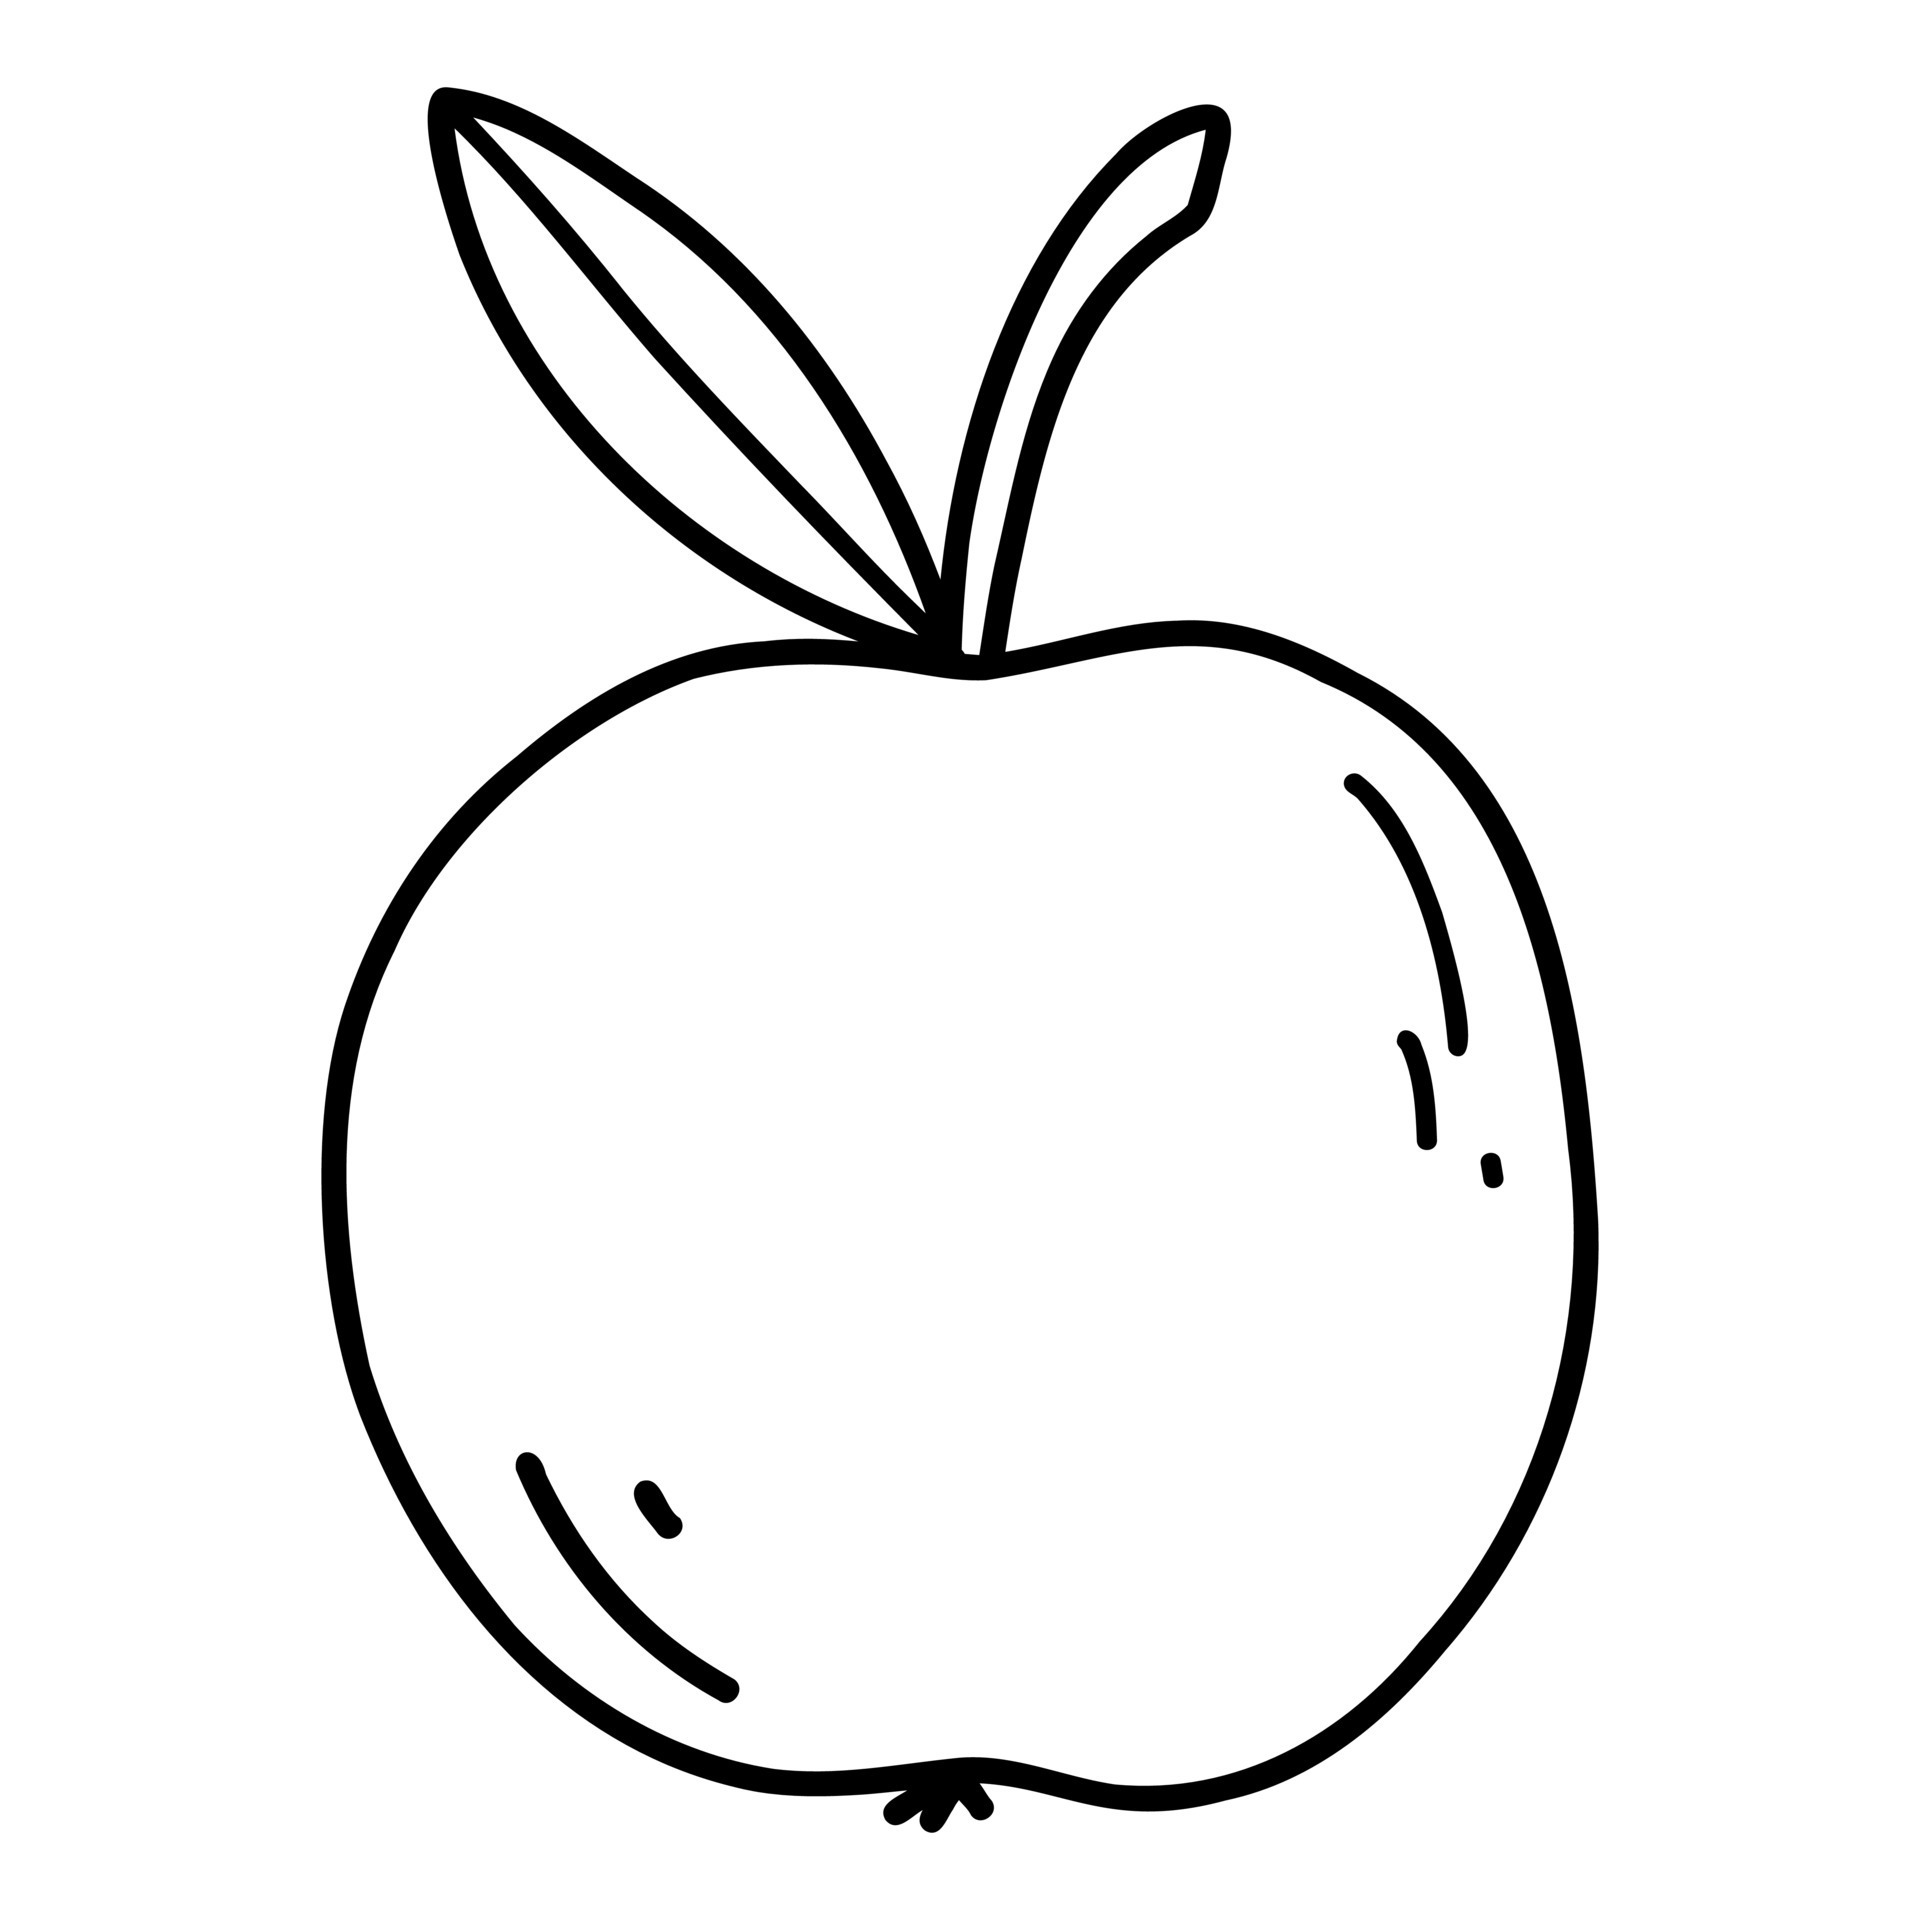 How To Draw An Apple For Kids An Easy StepByStep Guide